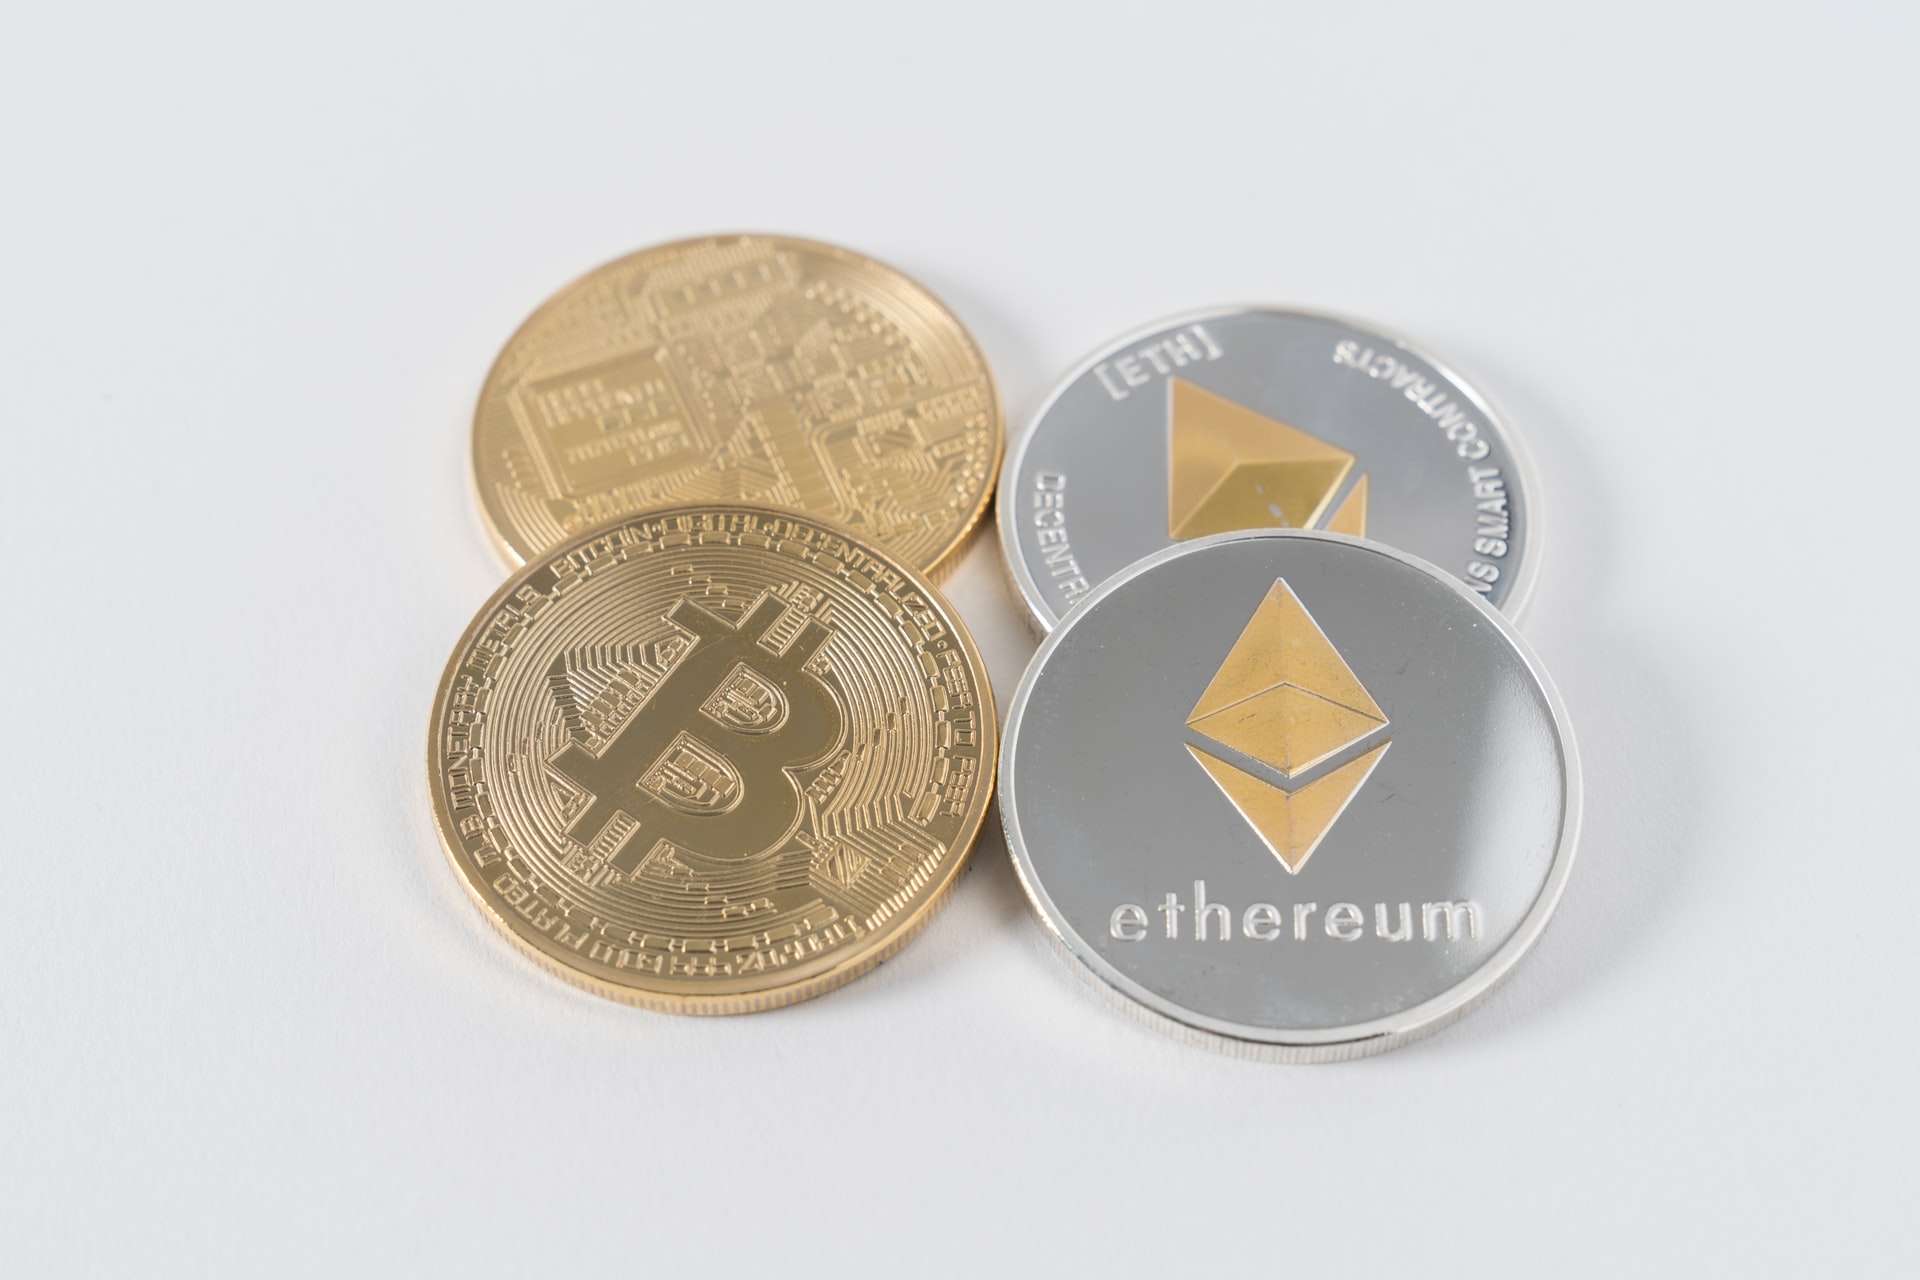 Image of two bitcoins next to two ethereum coins to illustrate the idea of what is ethereum and its differences to bitcoin.